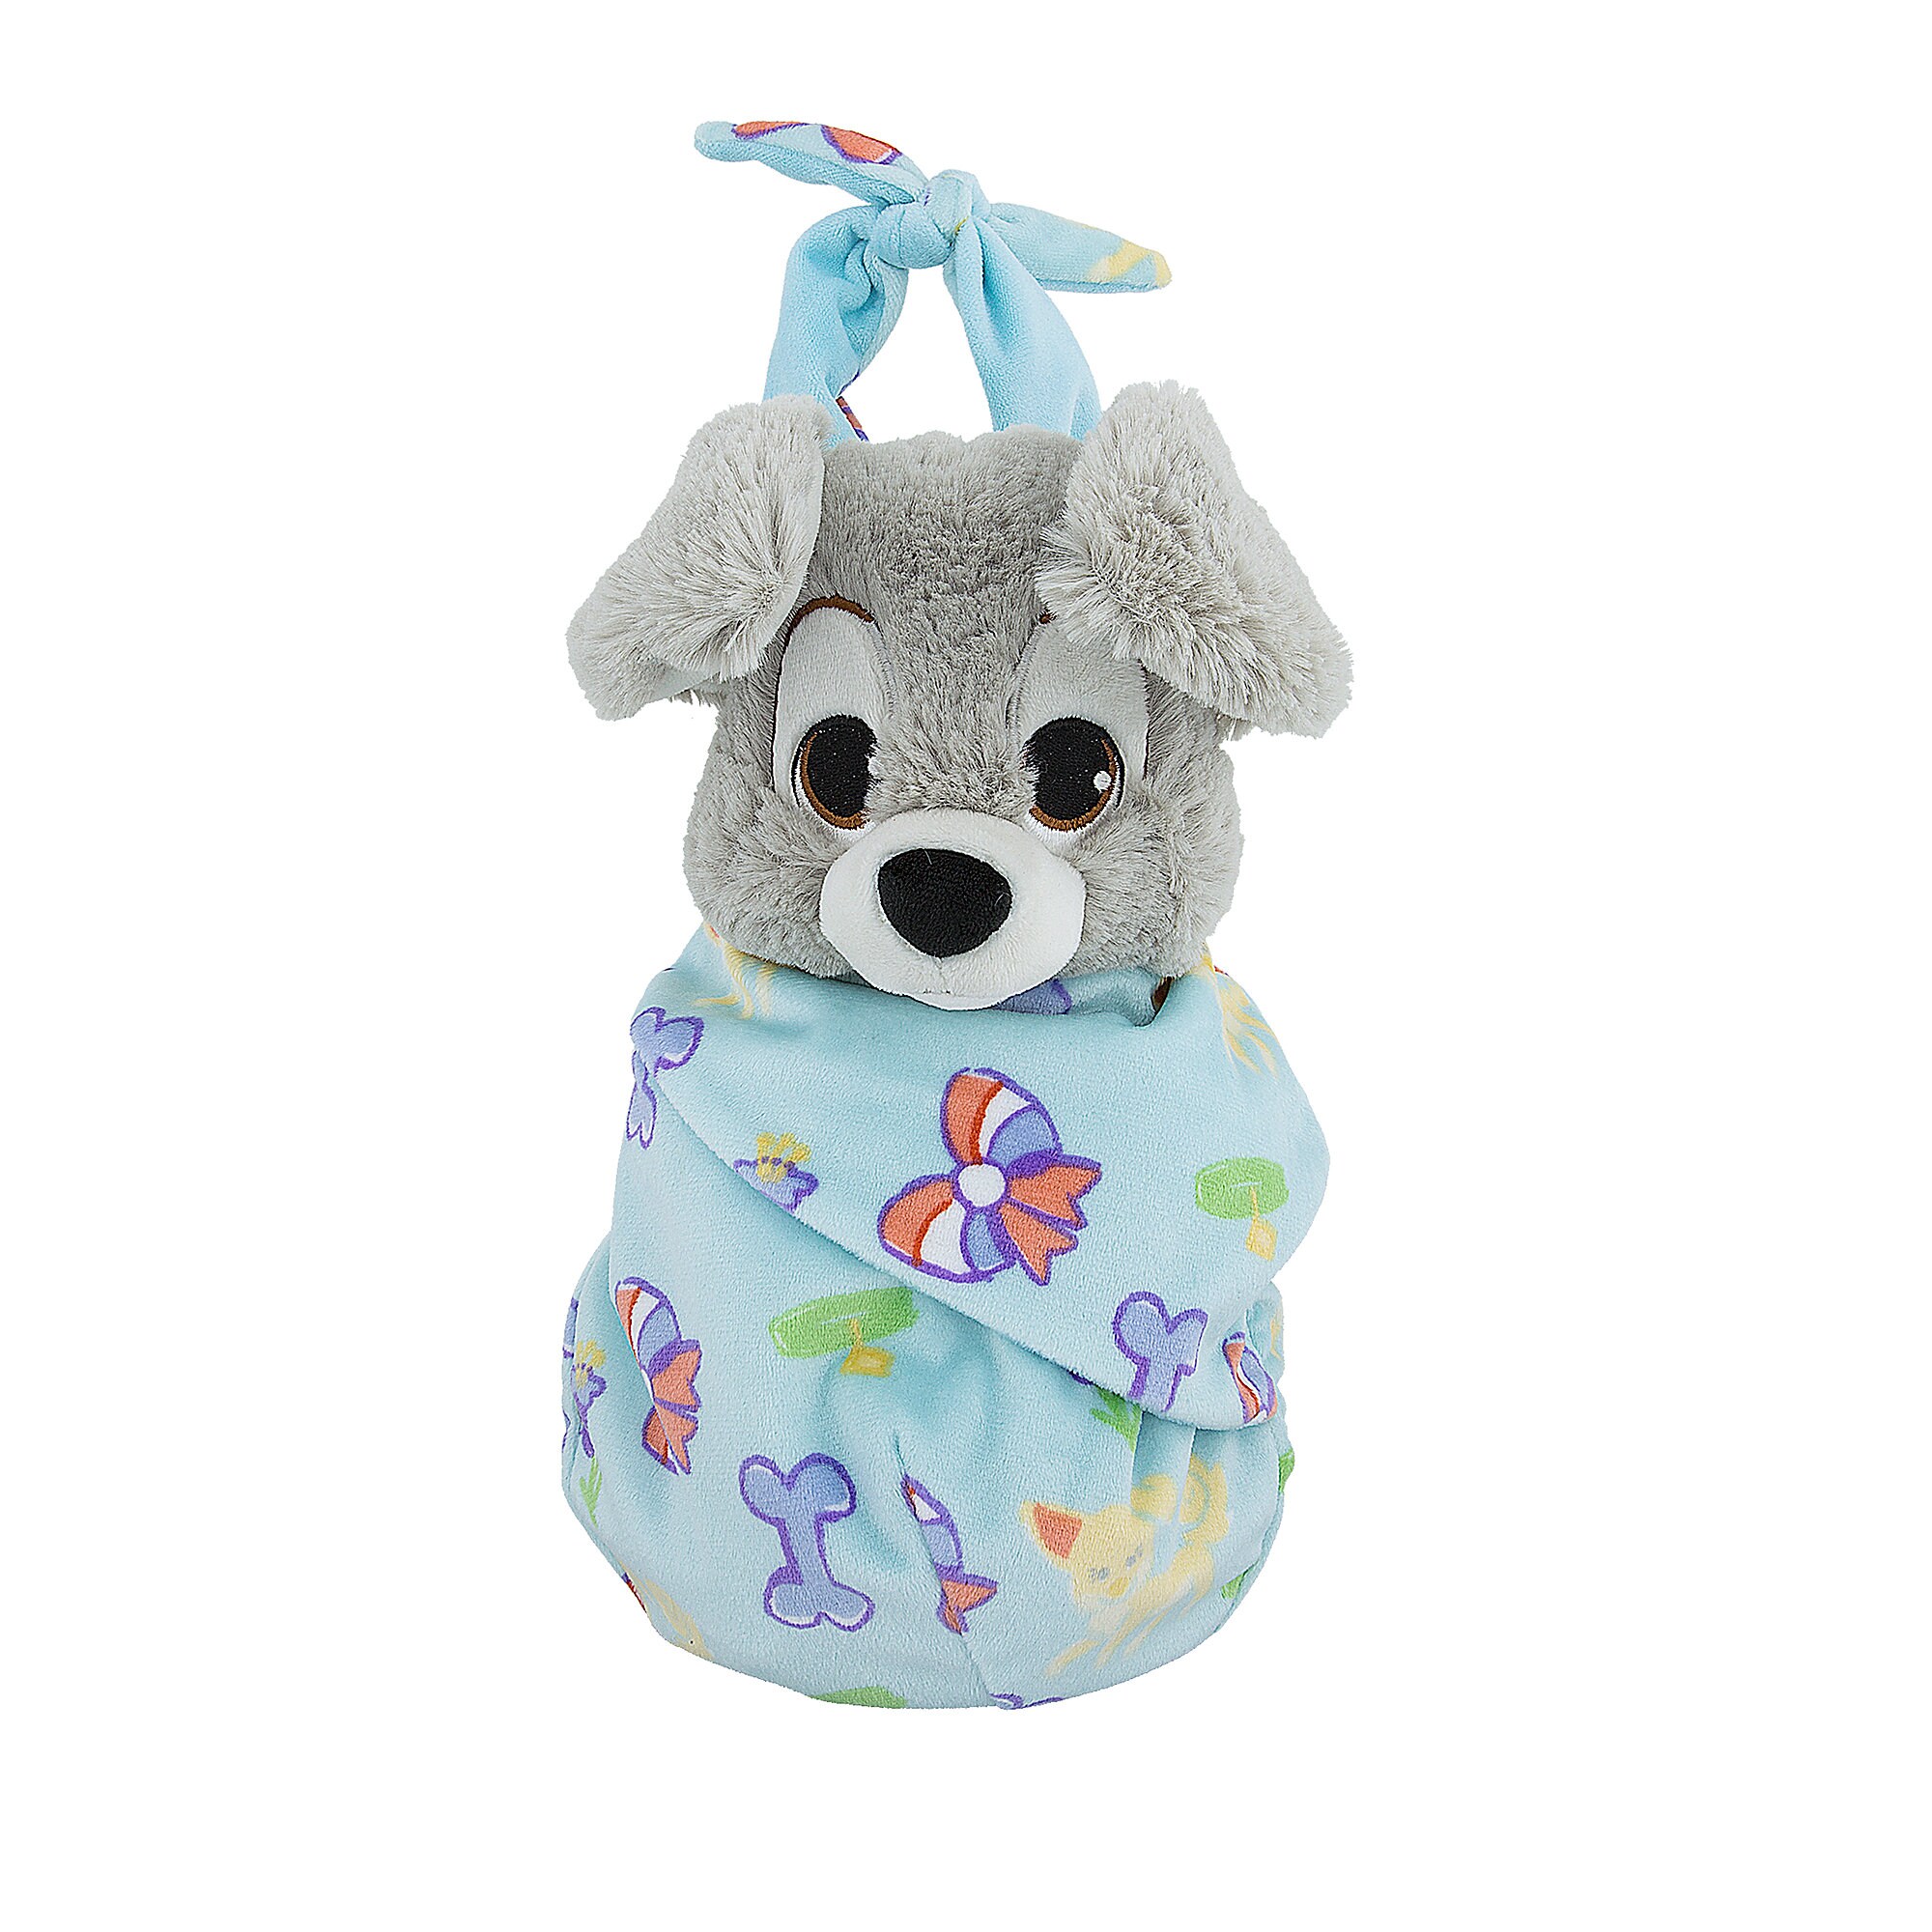 Scamp Plush with Blanket Pouch - Disney's Babies - Small